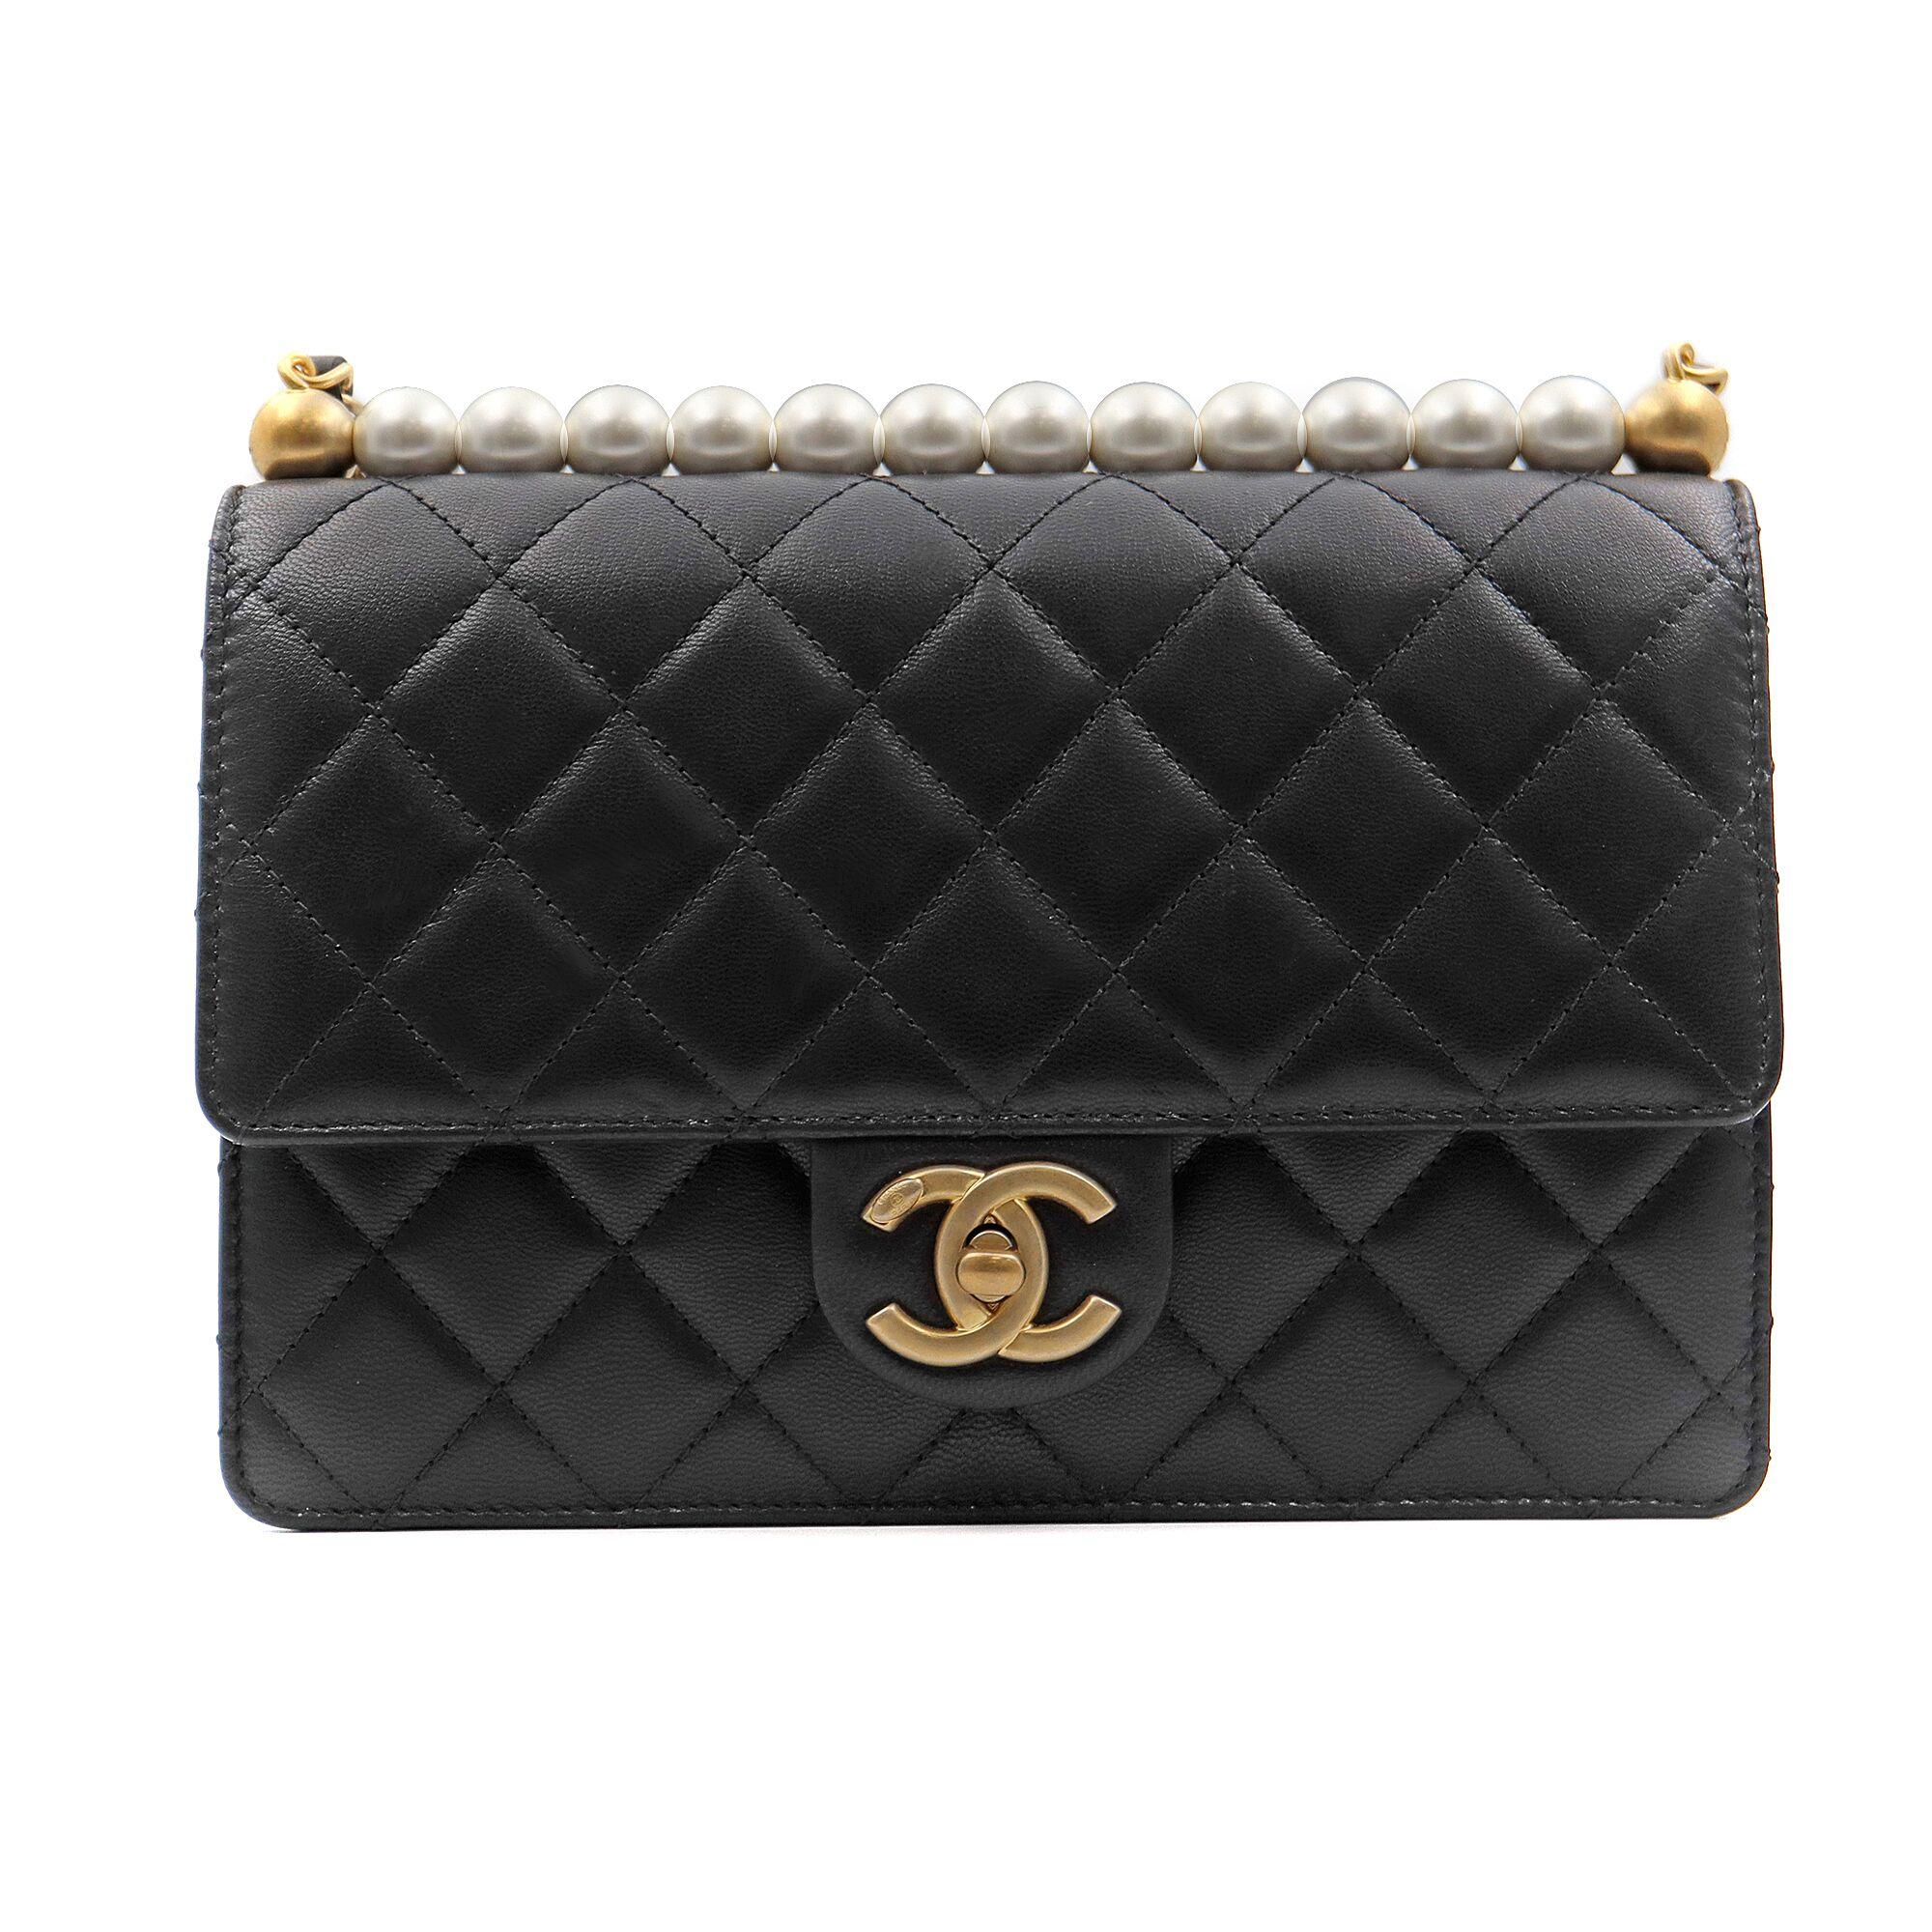 Chanel black goatskin, Imitation Pearls & Gold-Tone Metal flap bag. Cross-body style. Very classic, elegant an chic. 
New without tags, no signs of wear. Comes with original box, papers and a dust bag.
Measurements: L: 8.5 inch, H: 6.5 inch, D: 2